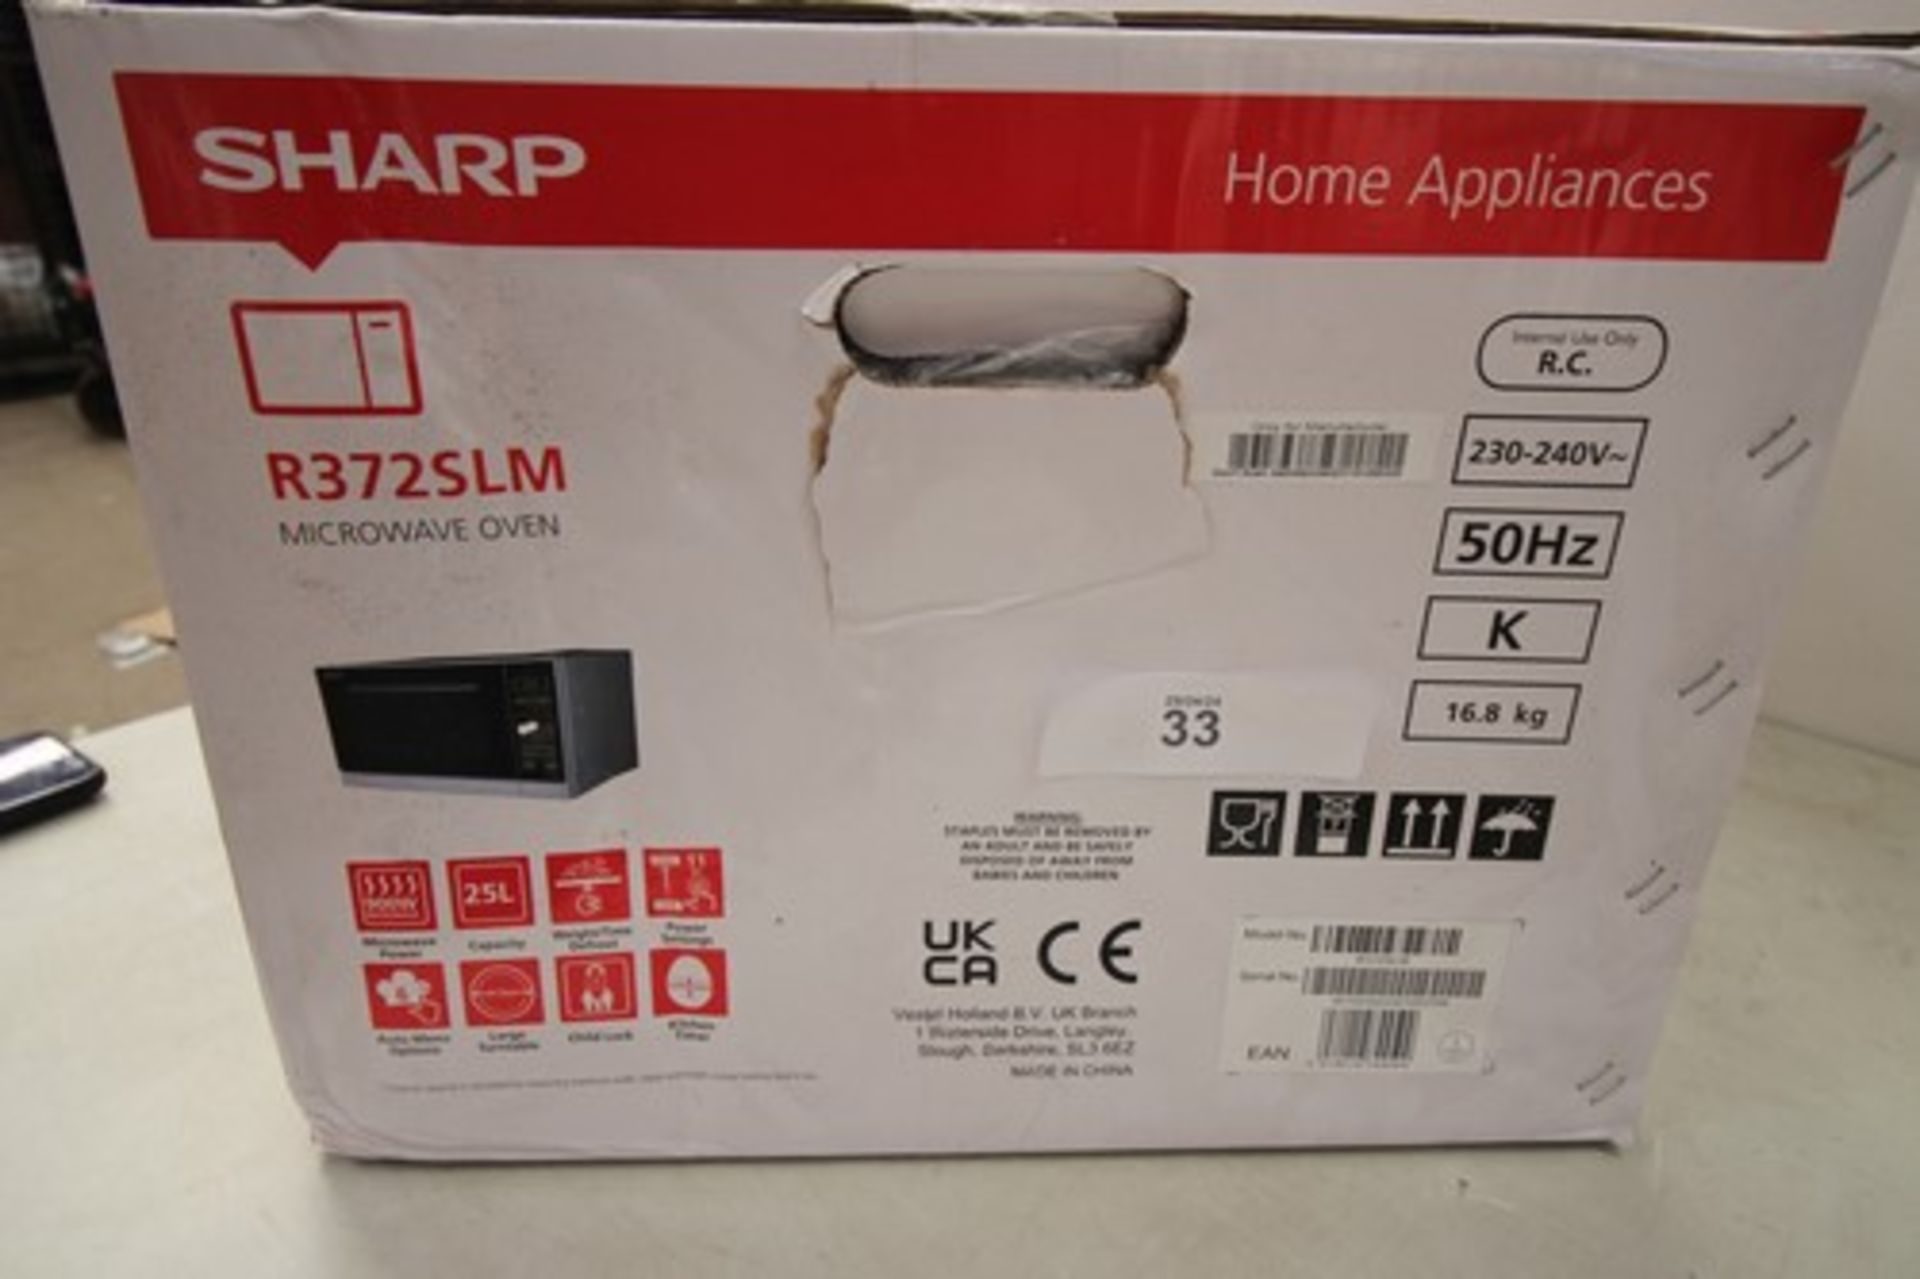 1 x Sharp 900w 25L microwave oven, model No: R3725LM - new in box (ES1) - Image 2 of 2